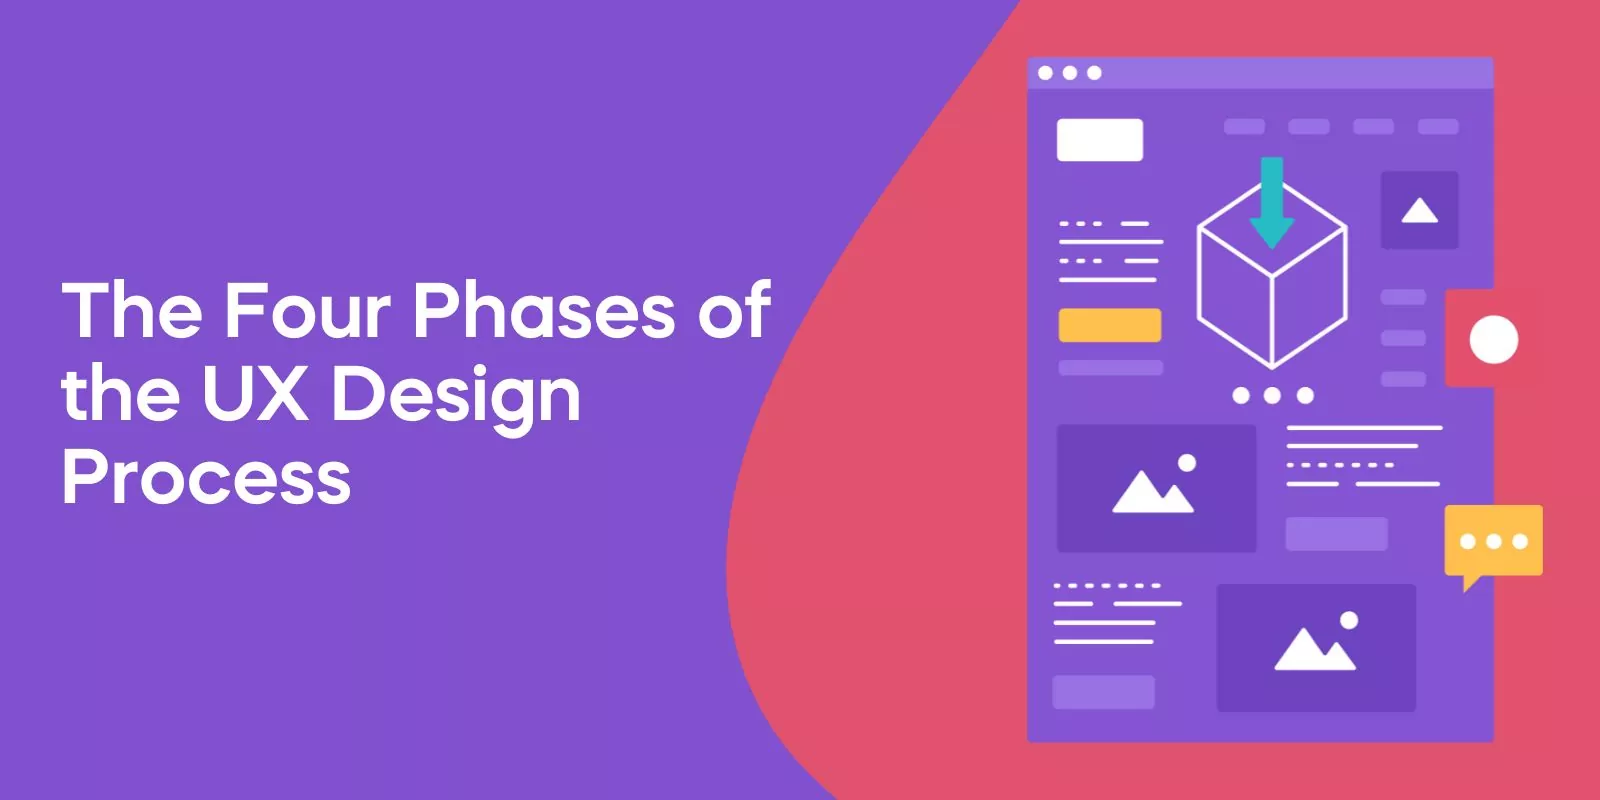 The Four Phases of the UX Design Process